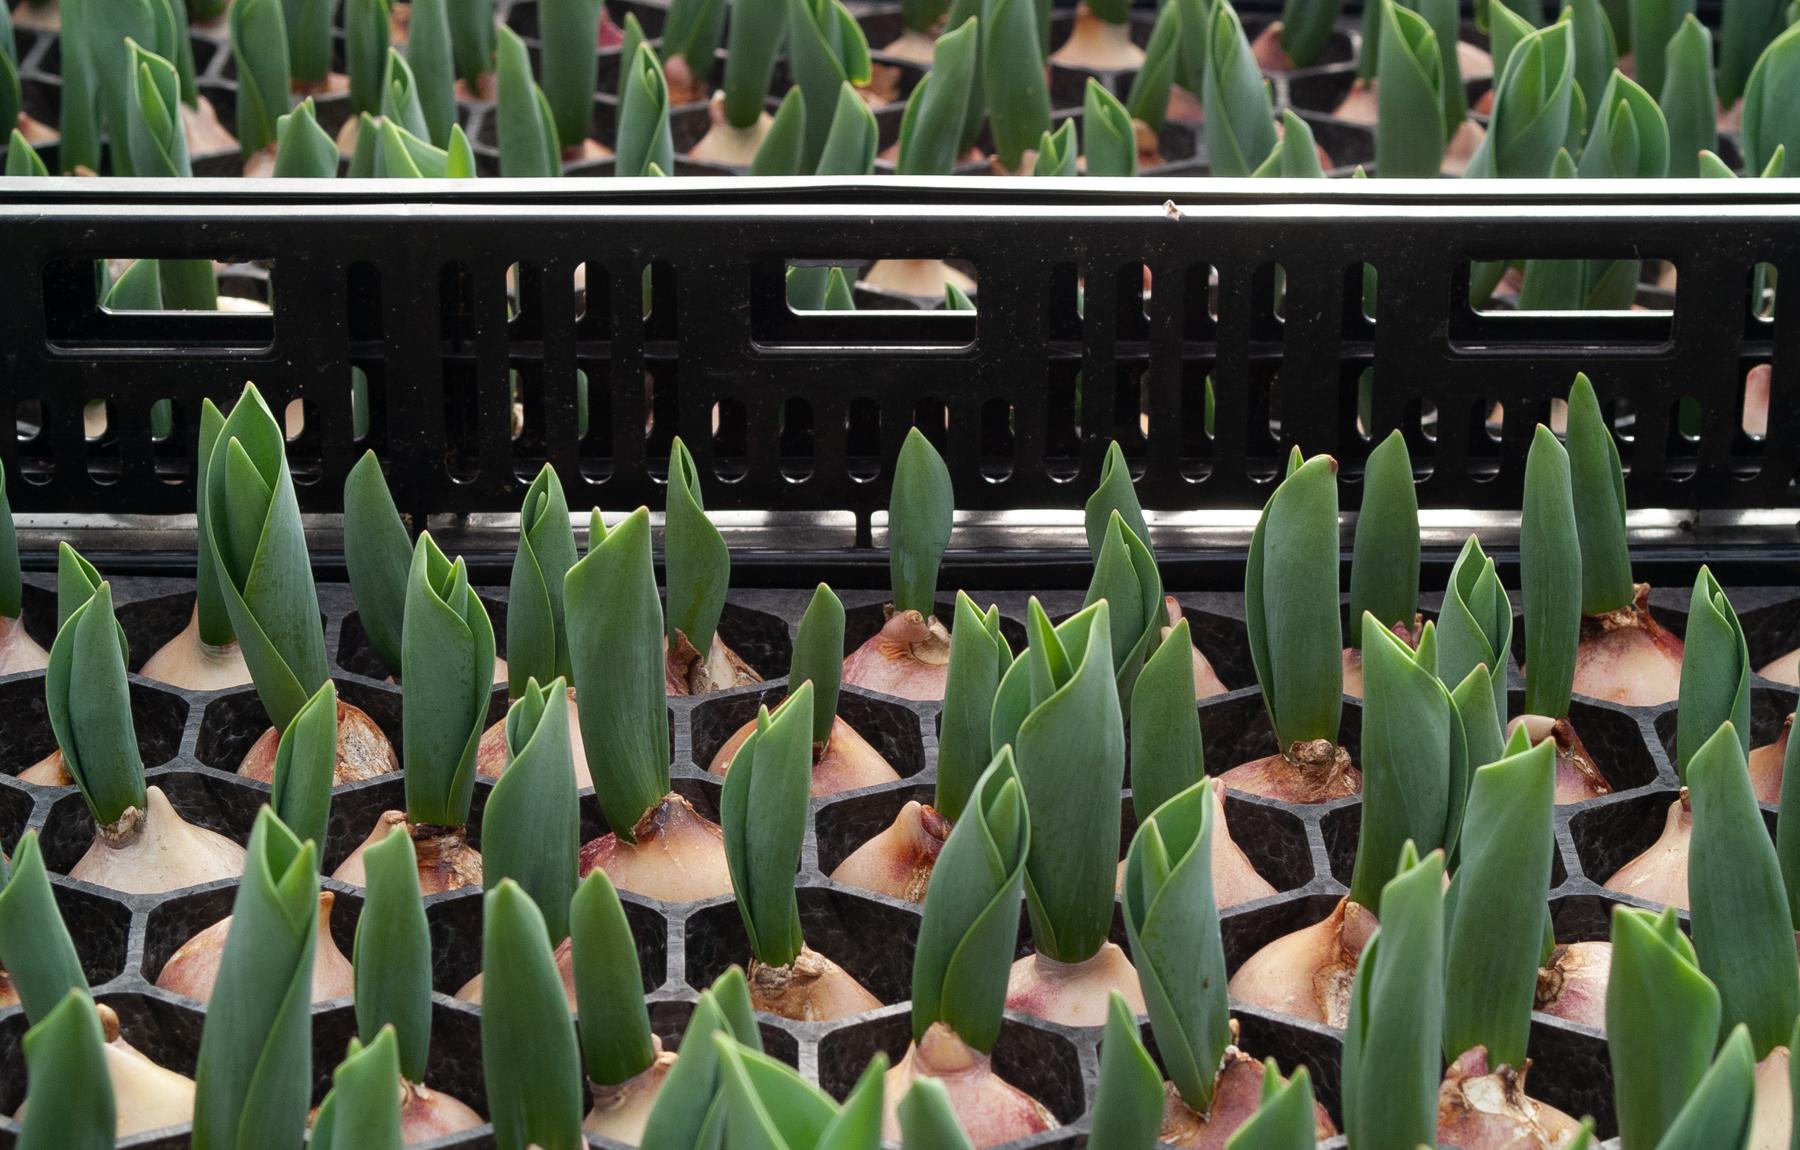 Early growth of tulips in crates